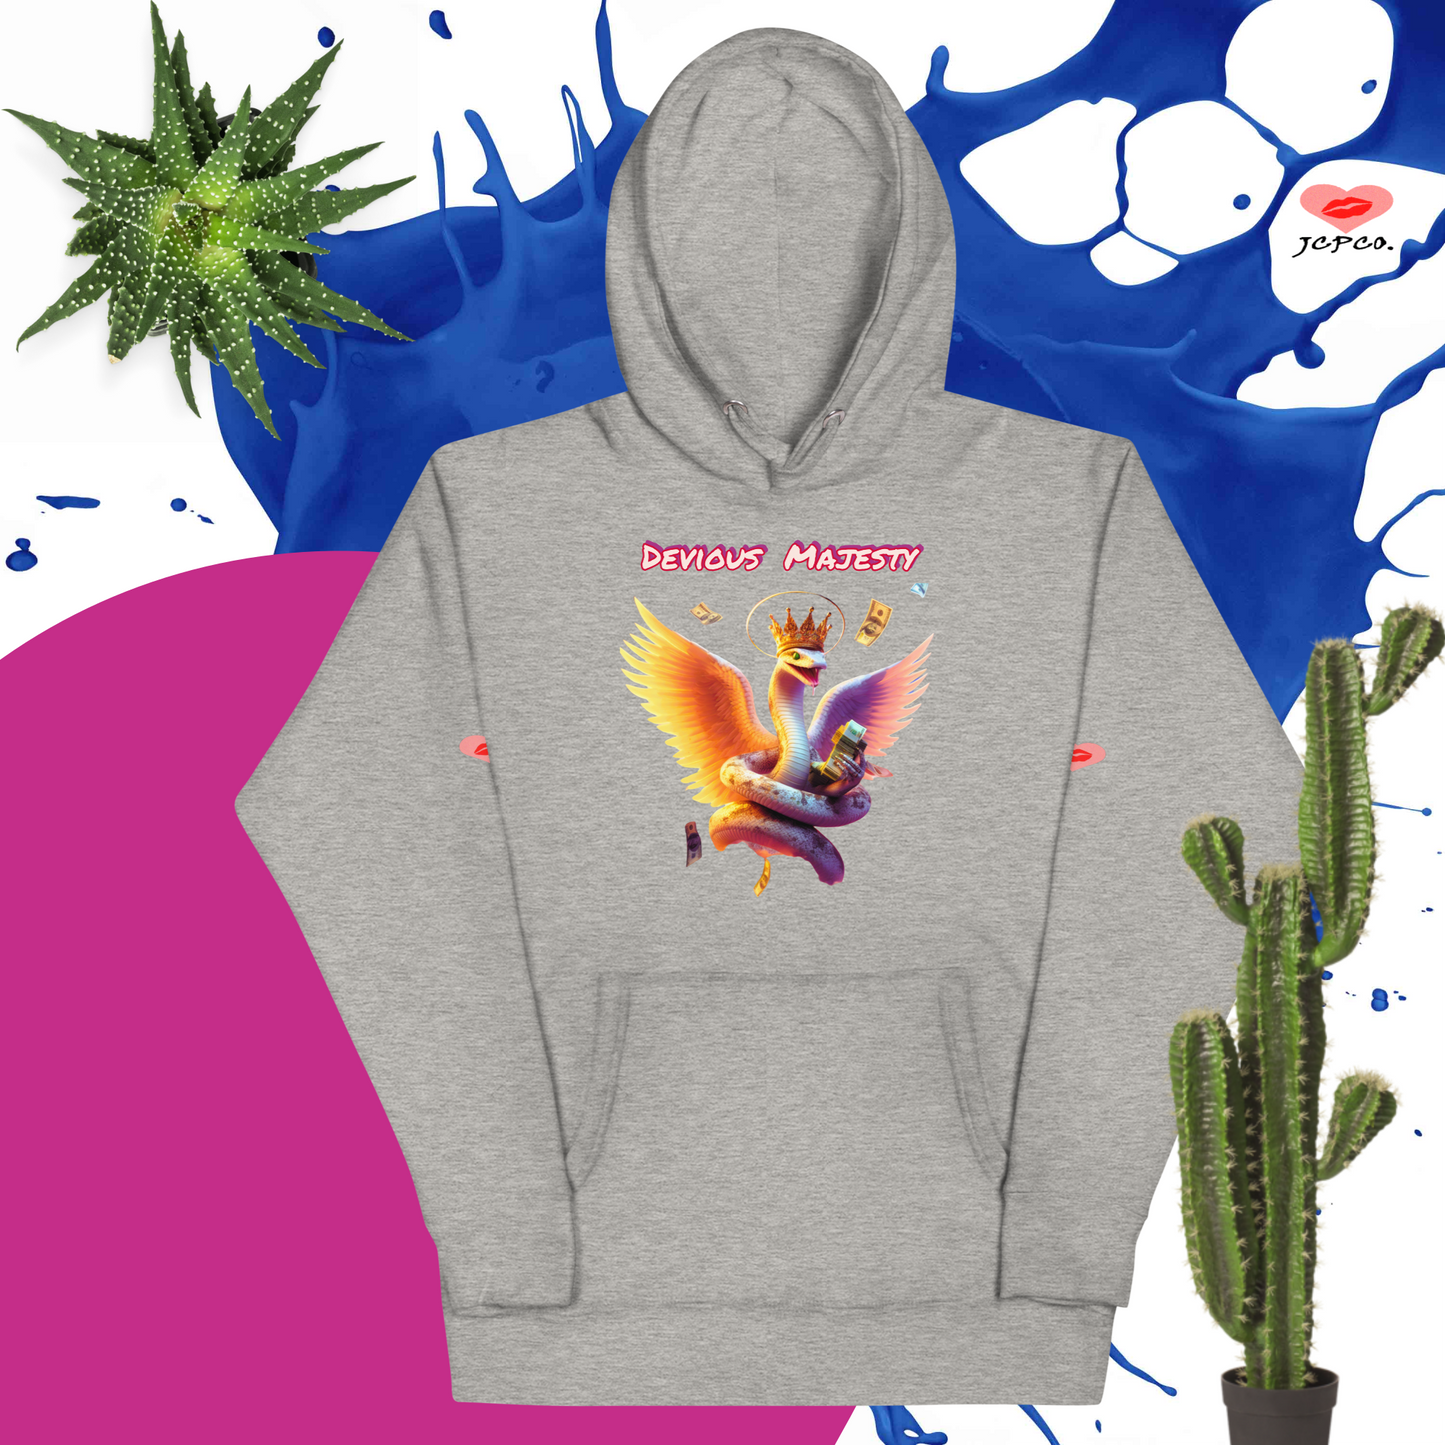 👑Devious Majesty Serpent's Swag 🐍 From Clouds to Cash💵 Unisex Hoodie🧥